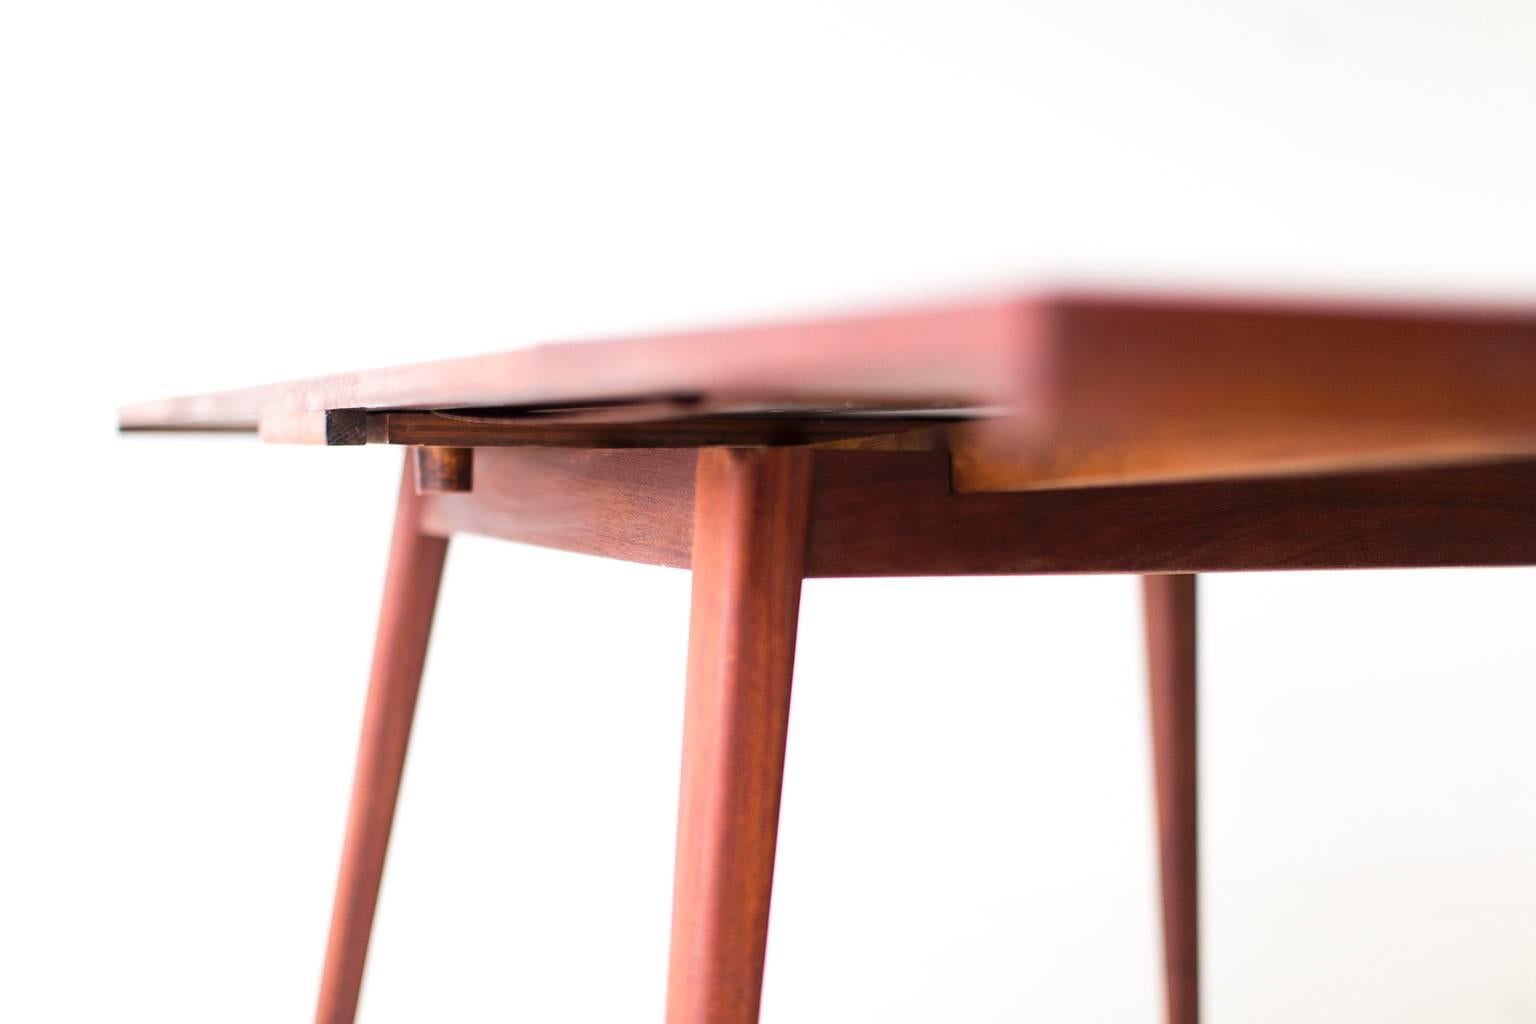 Designer: Jens Risom. 

Manufacturer: Jens Risom Design Inc. 
Period or model: Mid-Century Modern. 
Specs: Walnut, Maple. 

Condition: 

This early Jens Risom dining table (1949) is in very good condition. The wood has imperfections with age